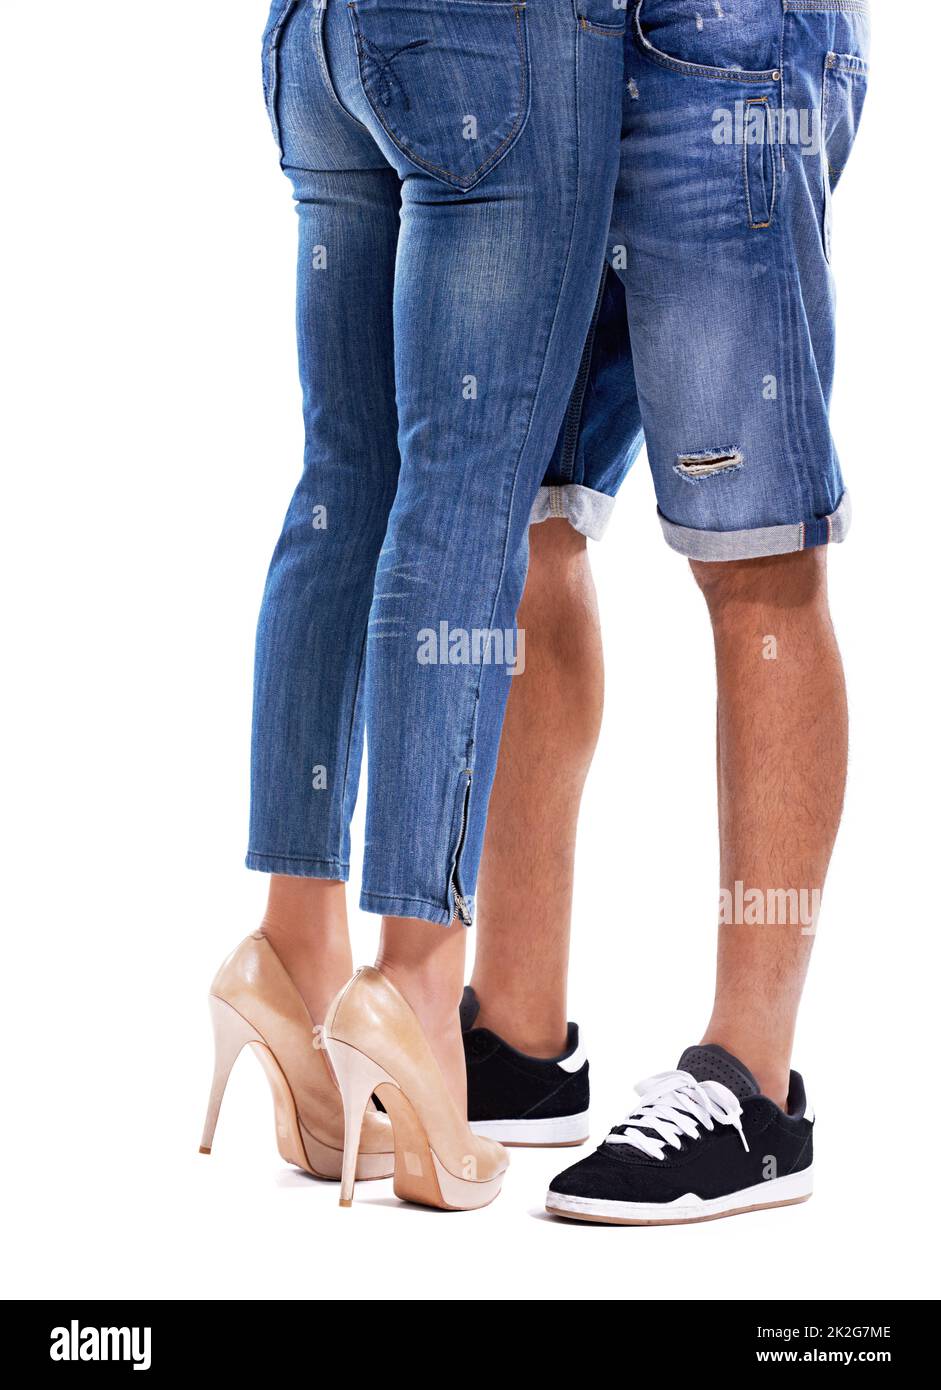 Get close to the one you love. Cropped studio shot of a couple standing close together. Stock Photo